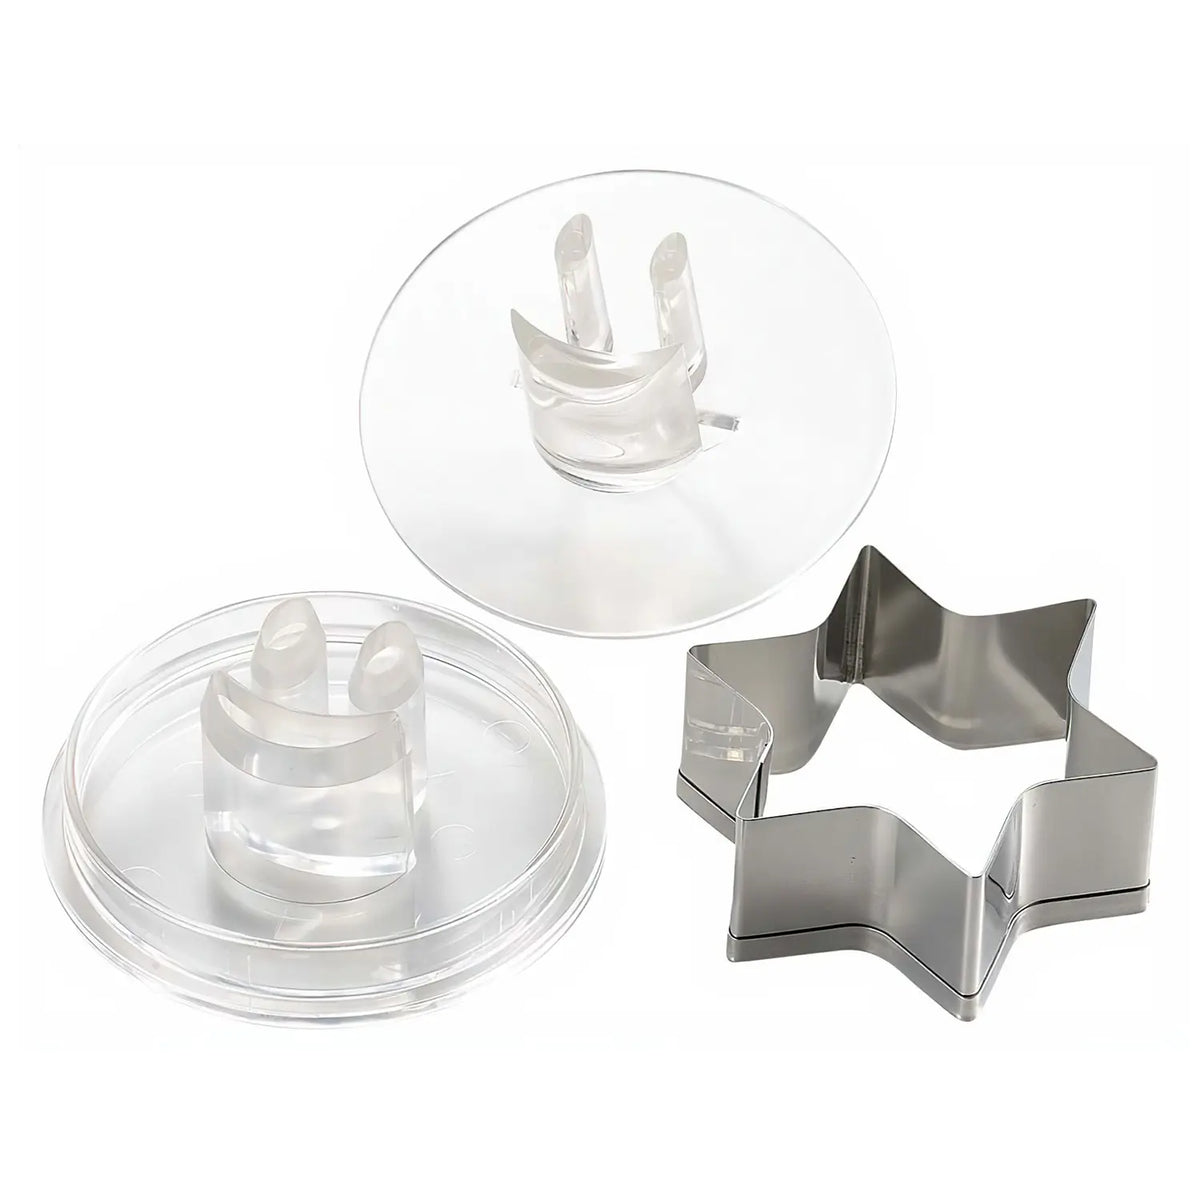 TIGERCROWN Cake Land Stainless Steel Star Cookie Cutter